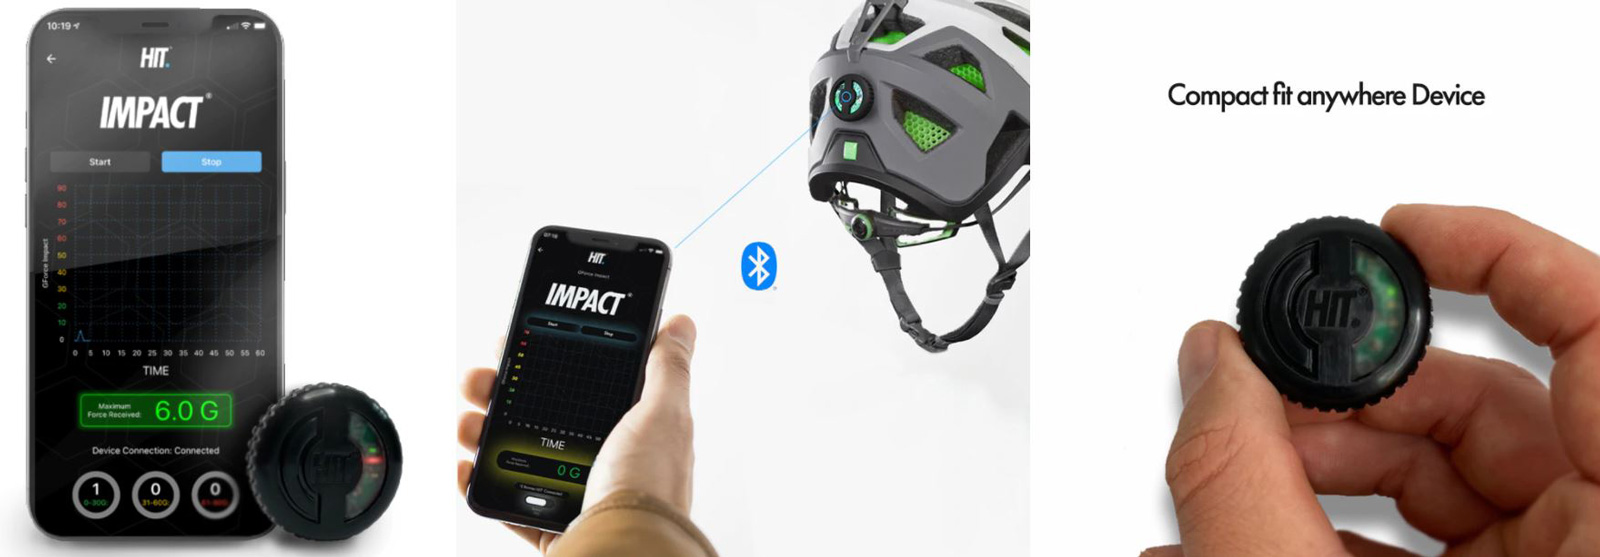 hit impact g-force detection device wearable for cyclists